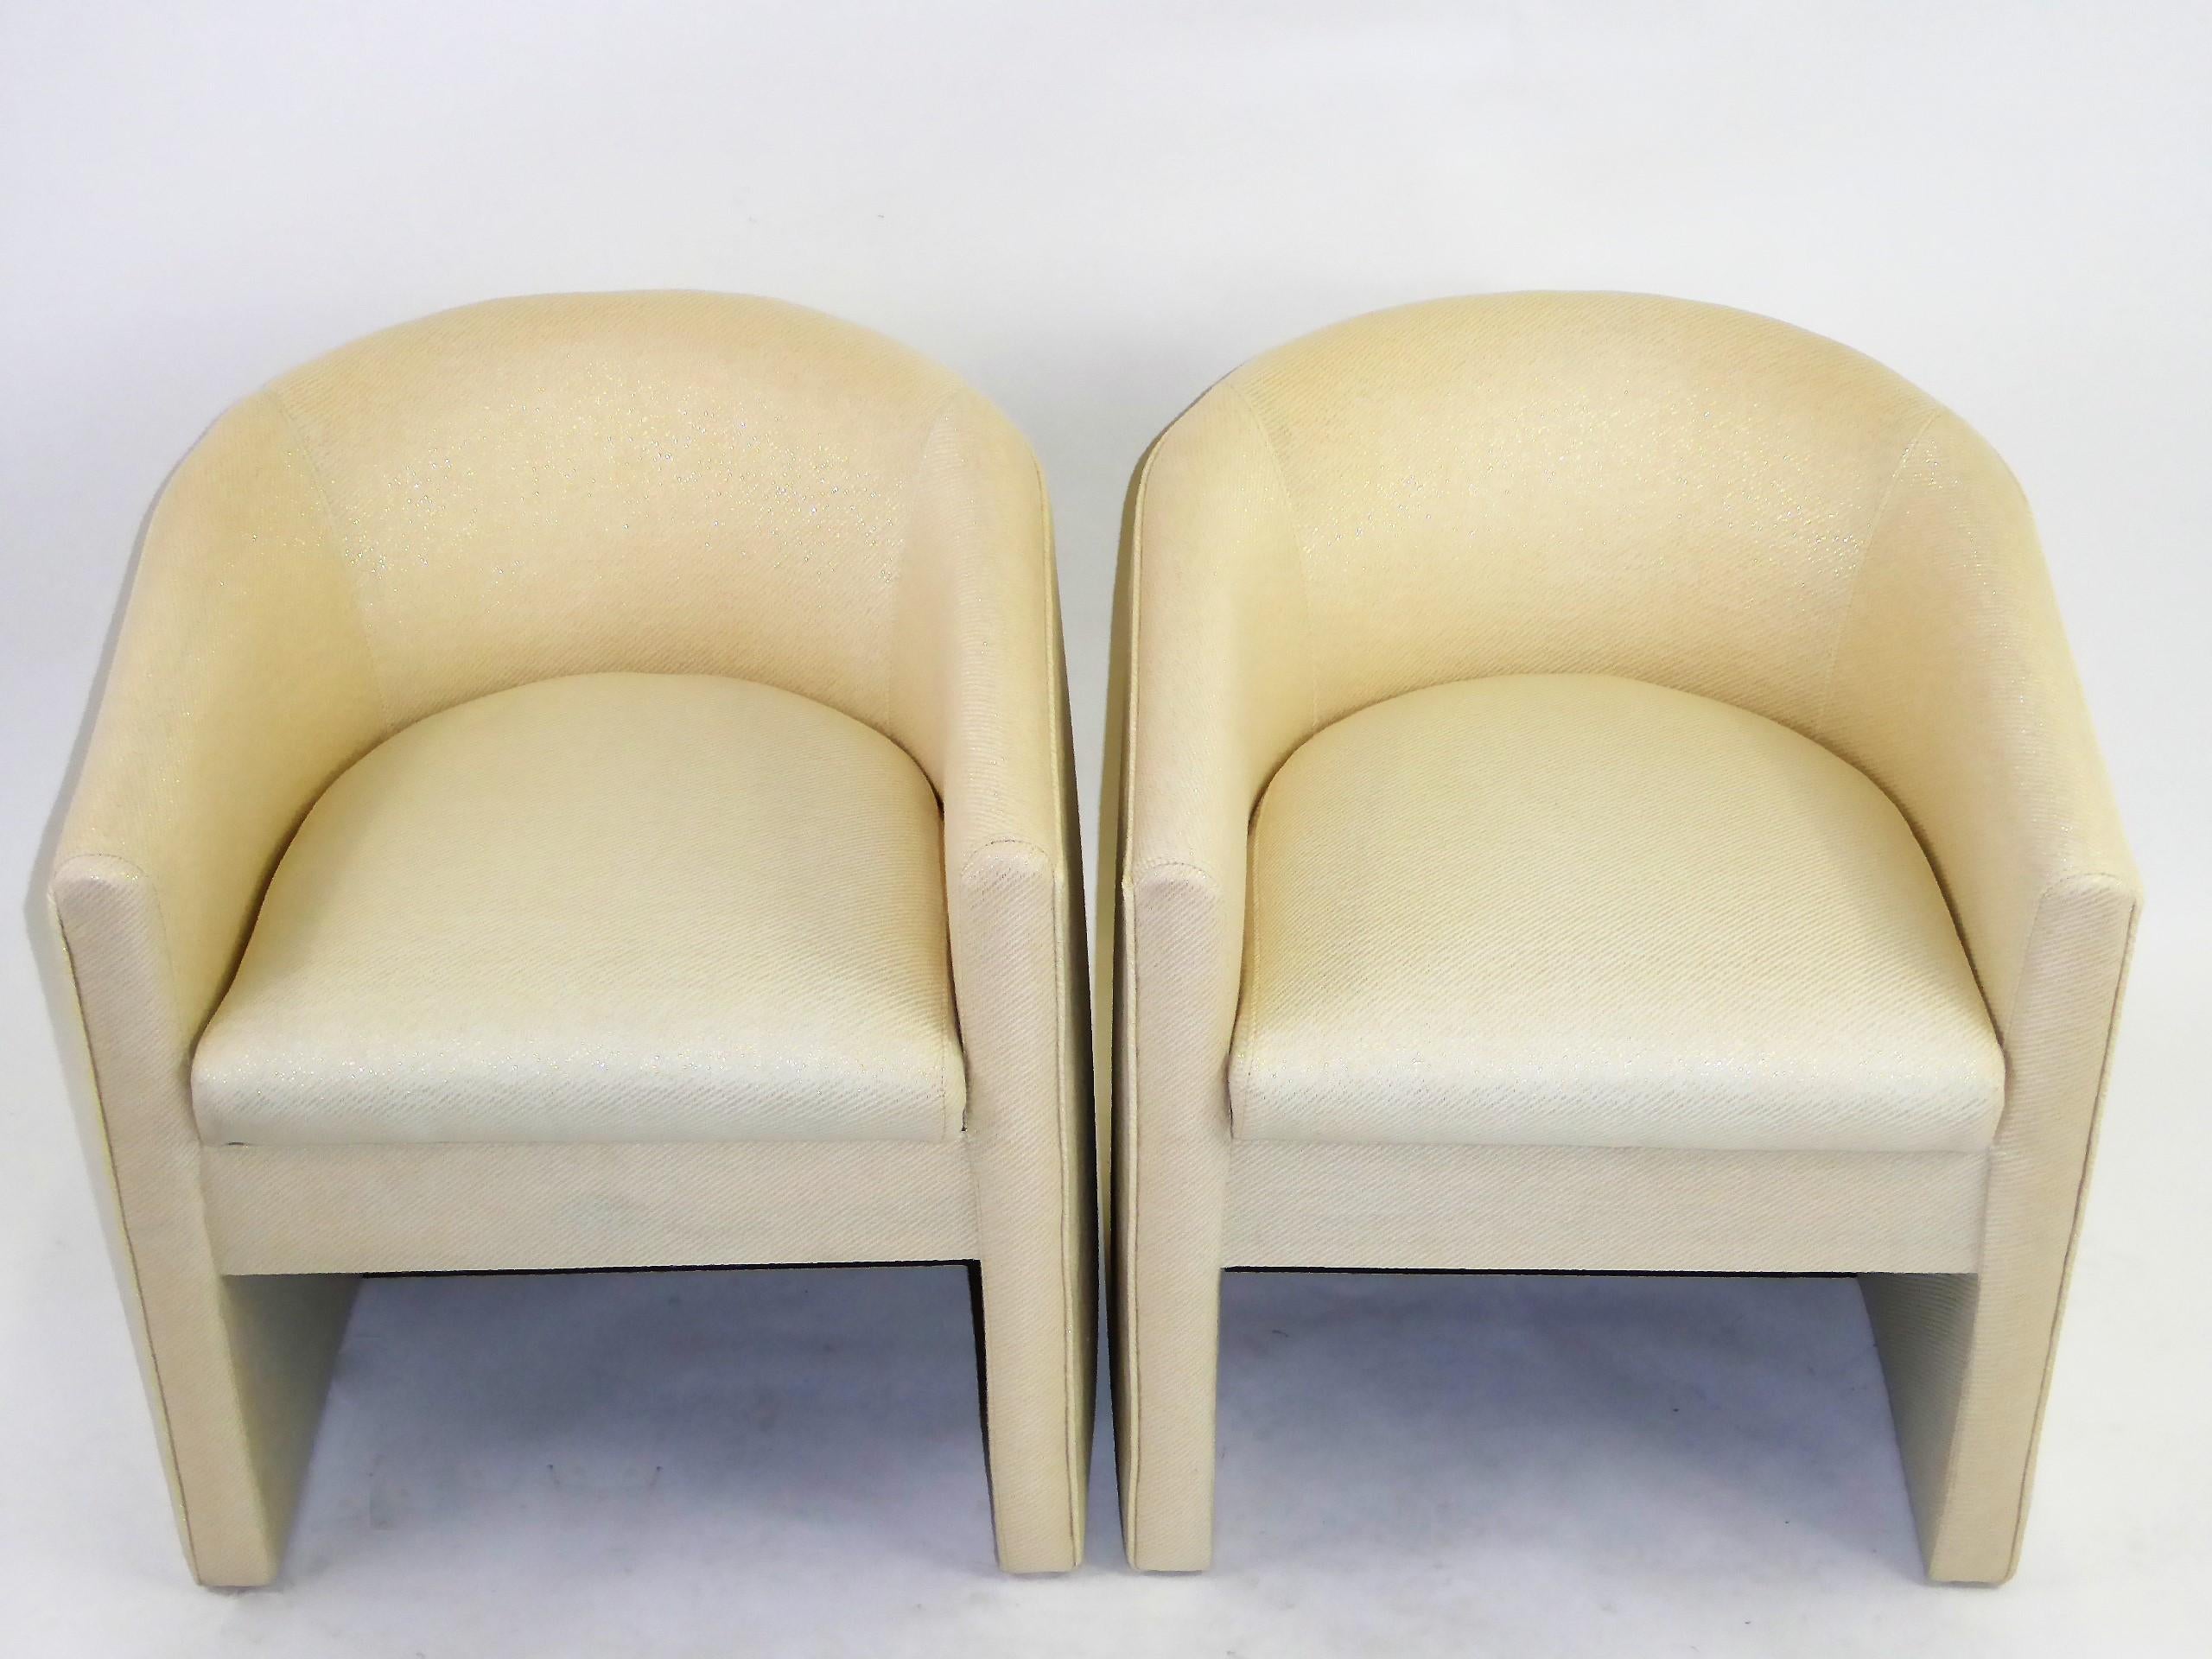 Wonderful pair of 1960s barrel back tub chairs newly upholstered in a creamy white woven fabric with gold threading. Inspired by the designs of Milo Baughman, Ward Bennett and Harvey Probber who all did variations of this chair. Great footprint and